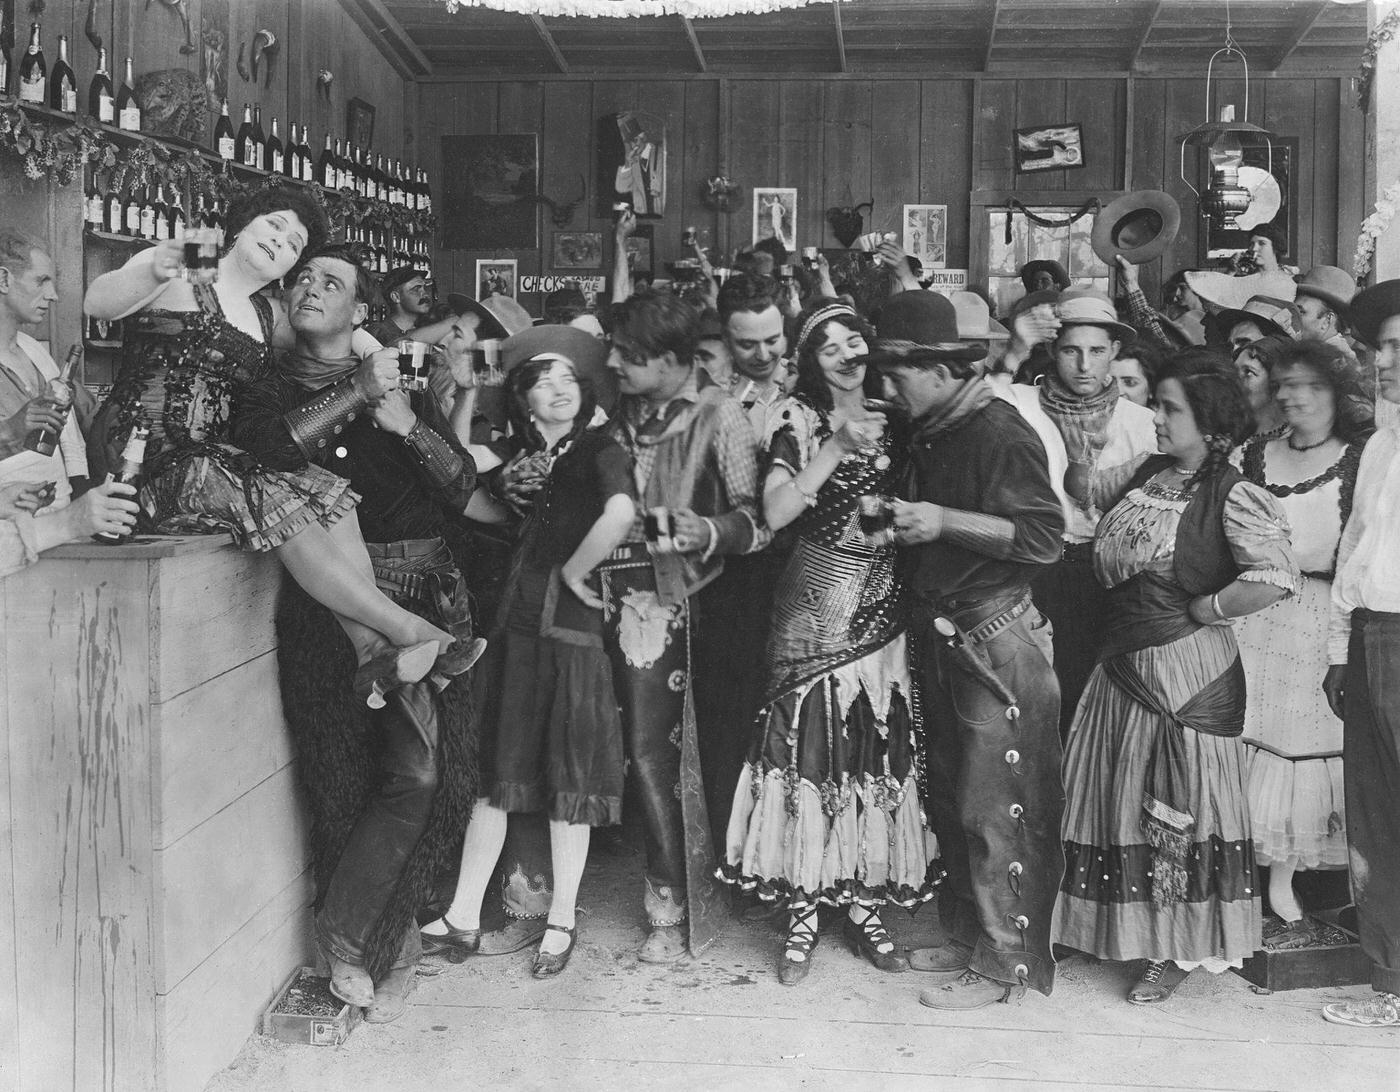 Cowboys and bar girls whoop it up in a still from an old silent Western.